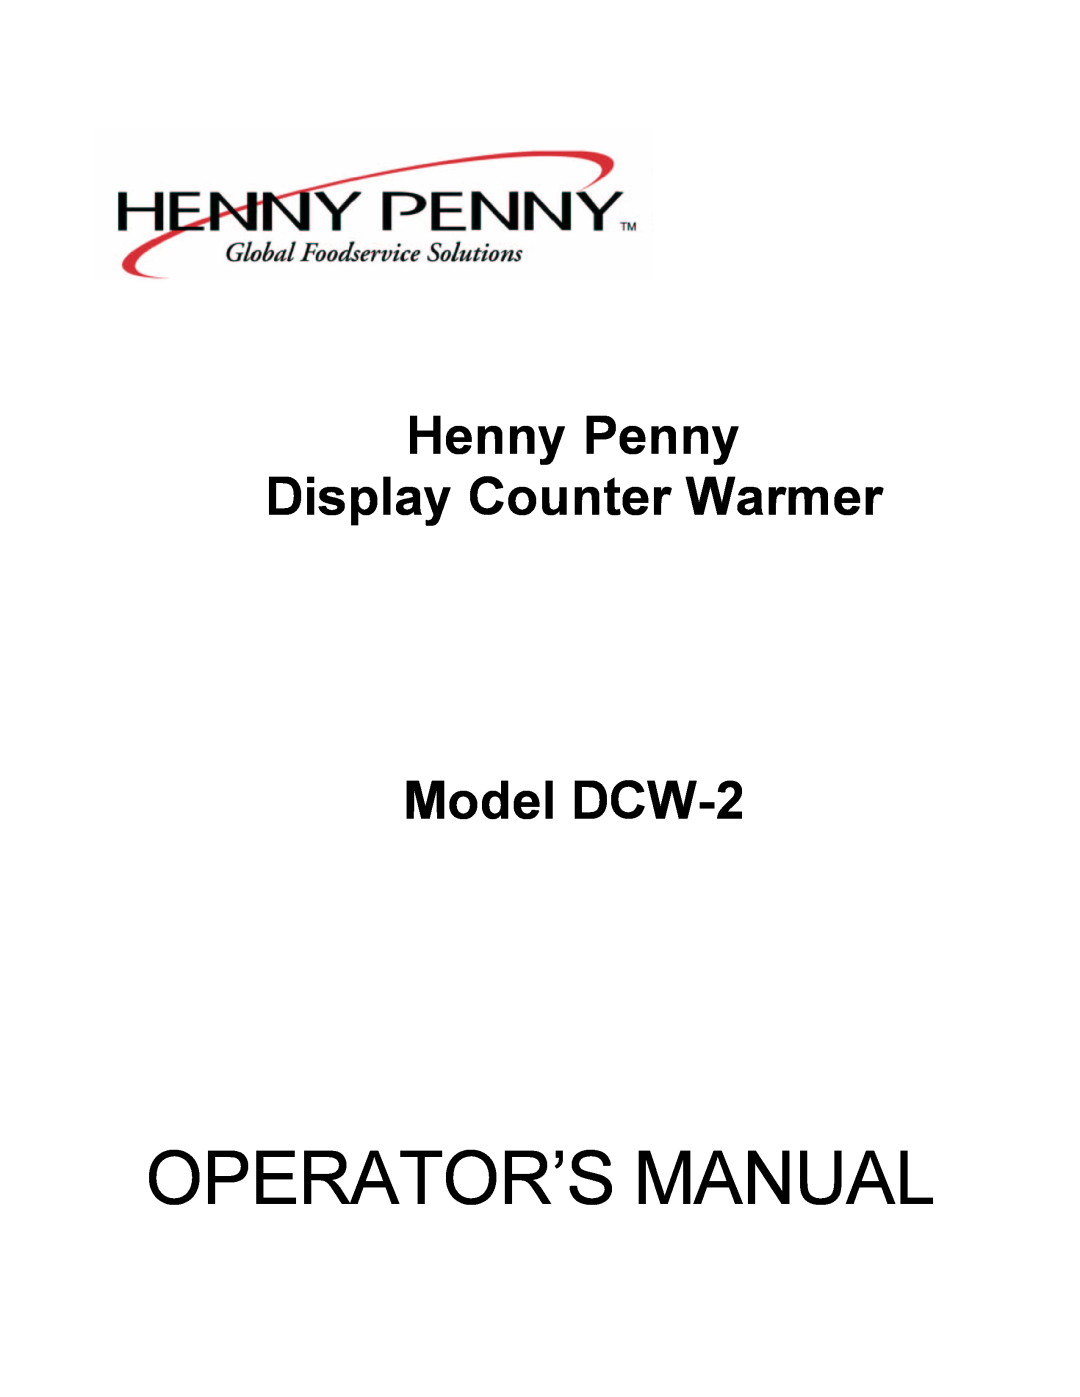 Henny Penny manual Operator’S Manual, Henny Penny Display Counter Warmer Model DCW-2 